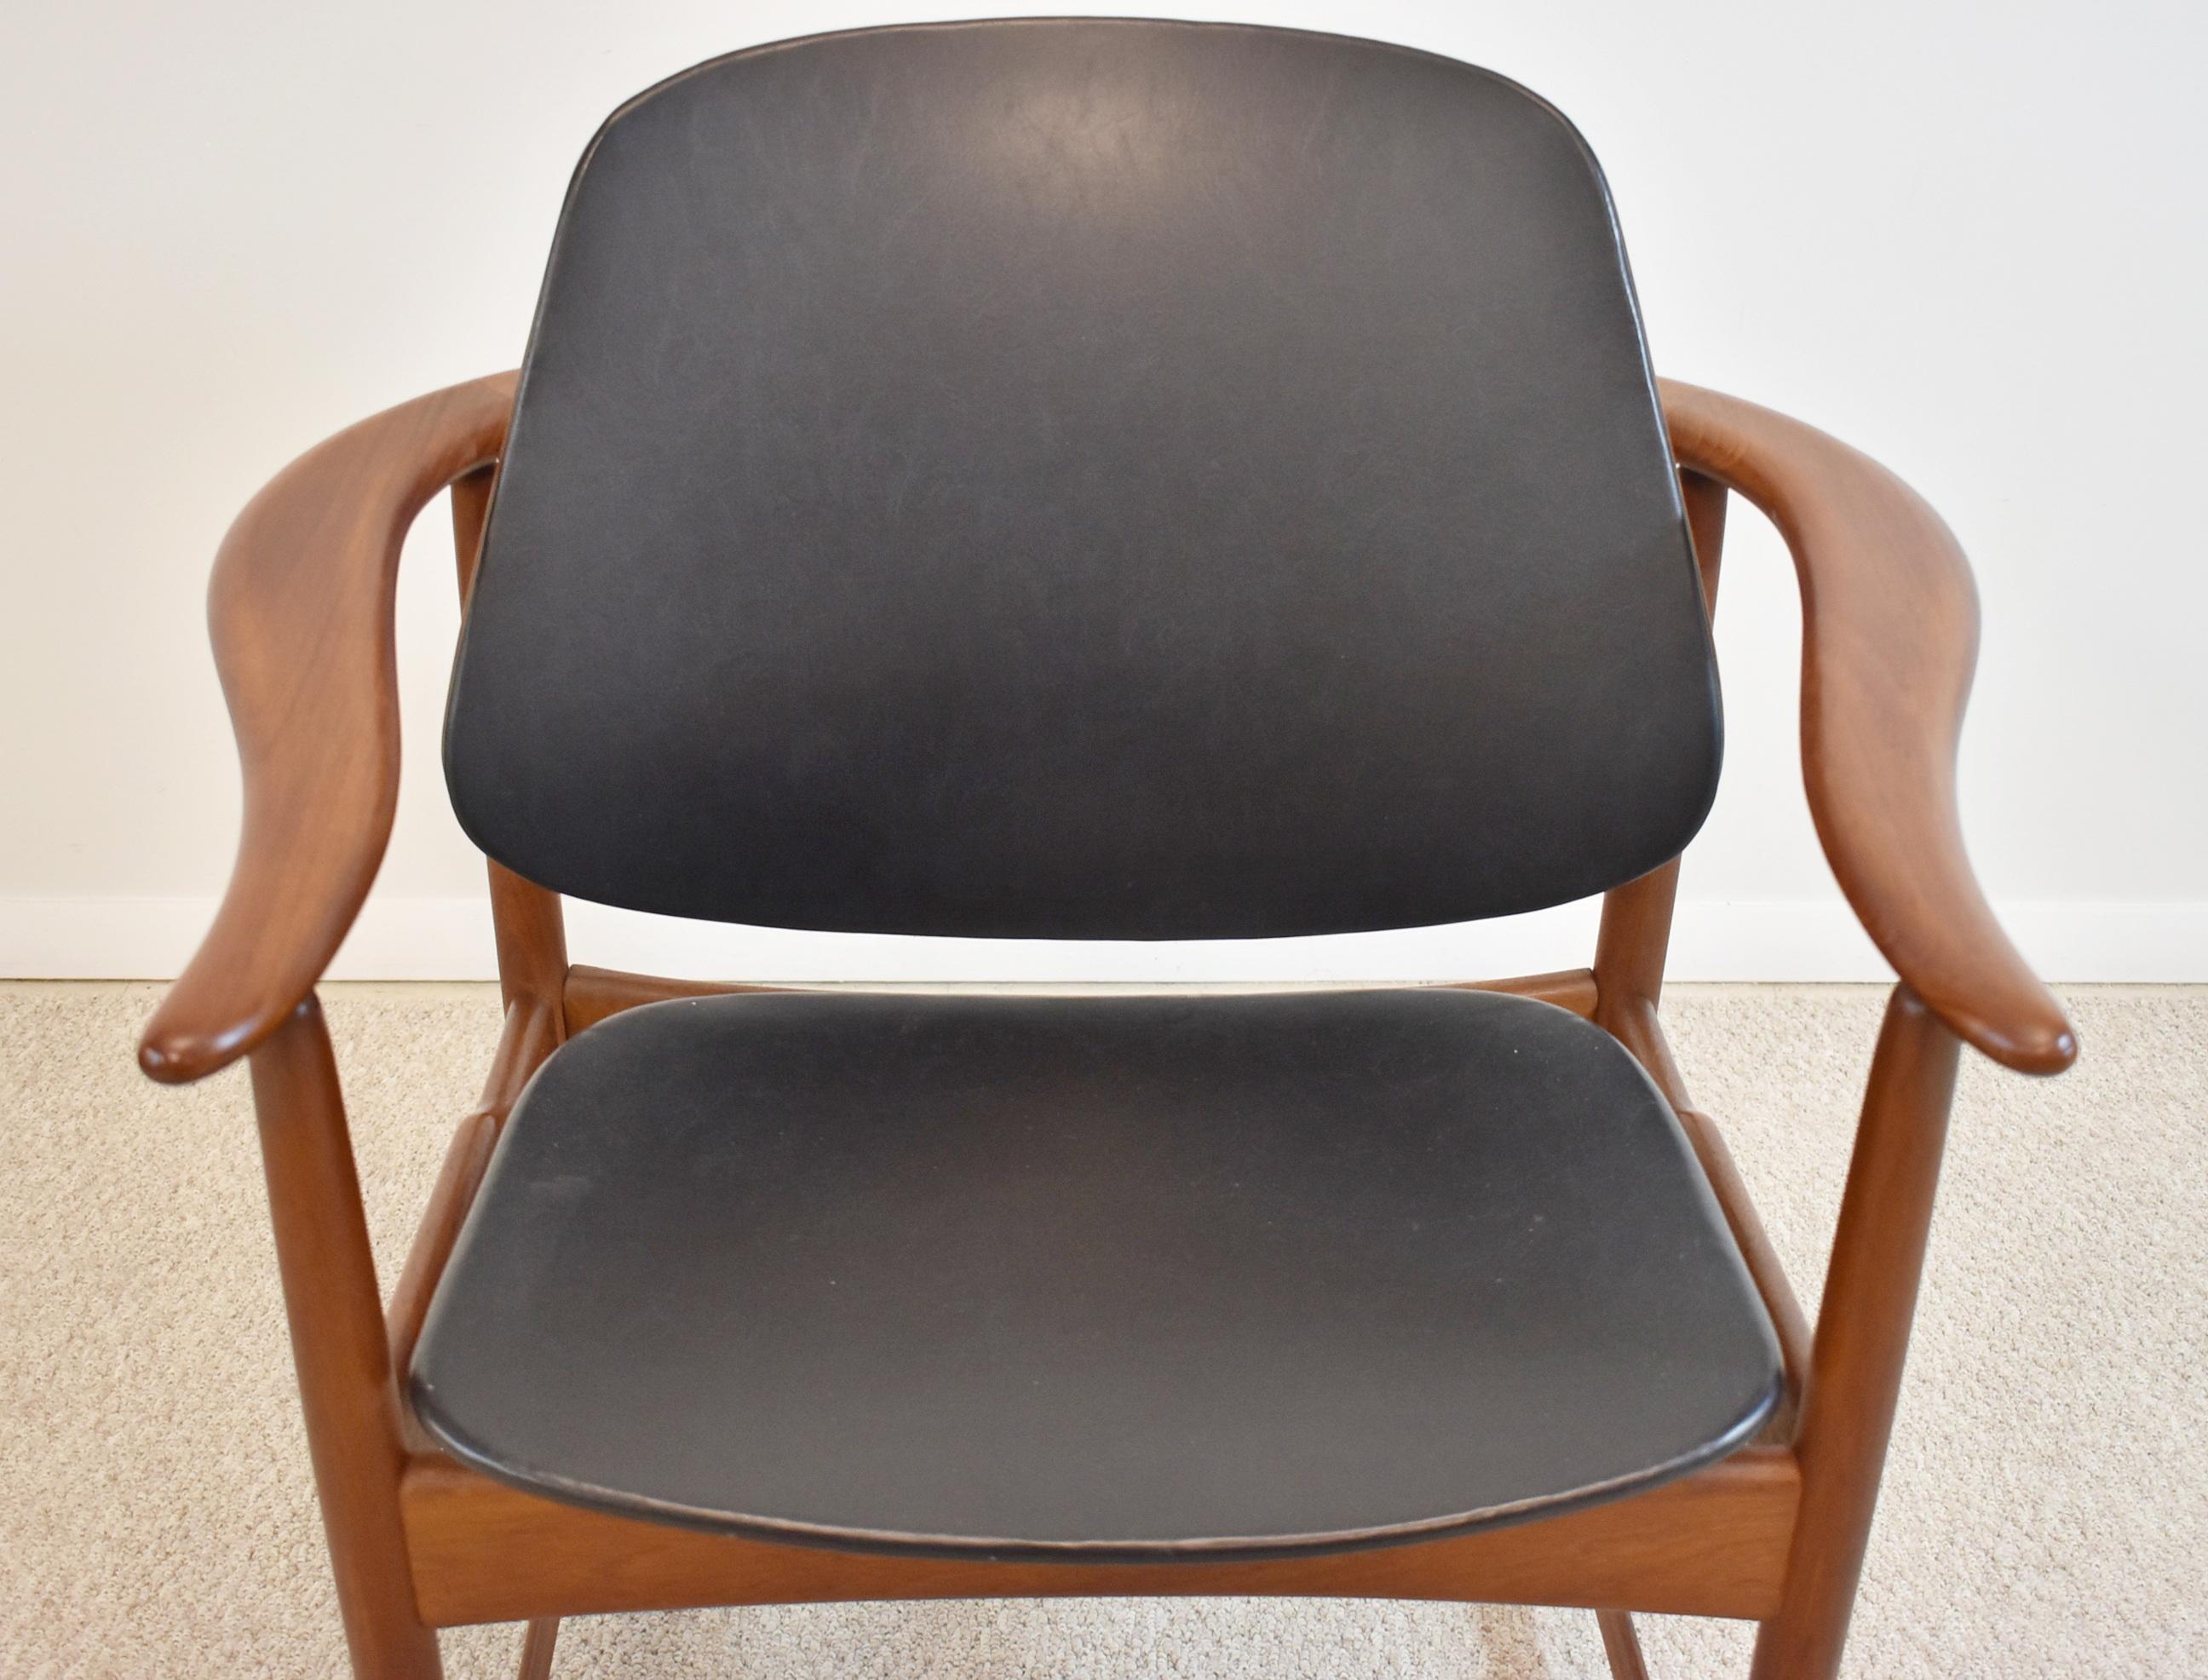 Mid-Century Modern danish teak armchair by Arne Hovmand-Olsen, circa 1960s. Mid-century modern chair in solid teak with floating back. Armrest is made in one piece in a horseshoe form around the back of the chair. Great design of brass tube